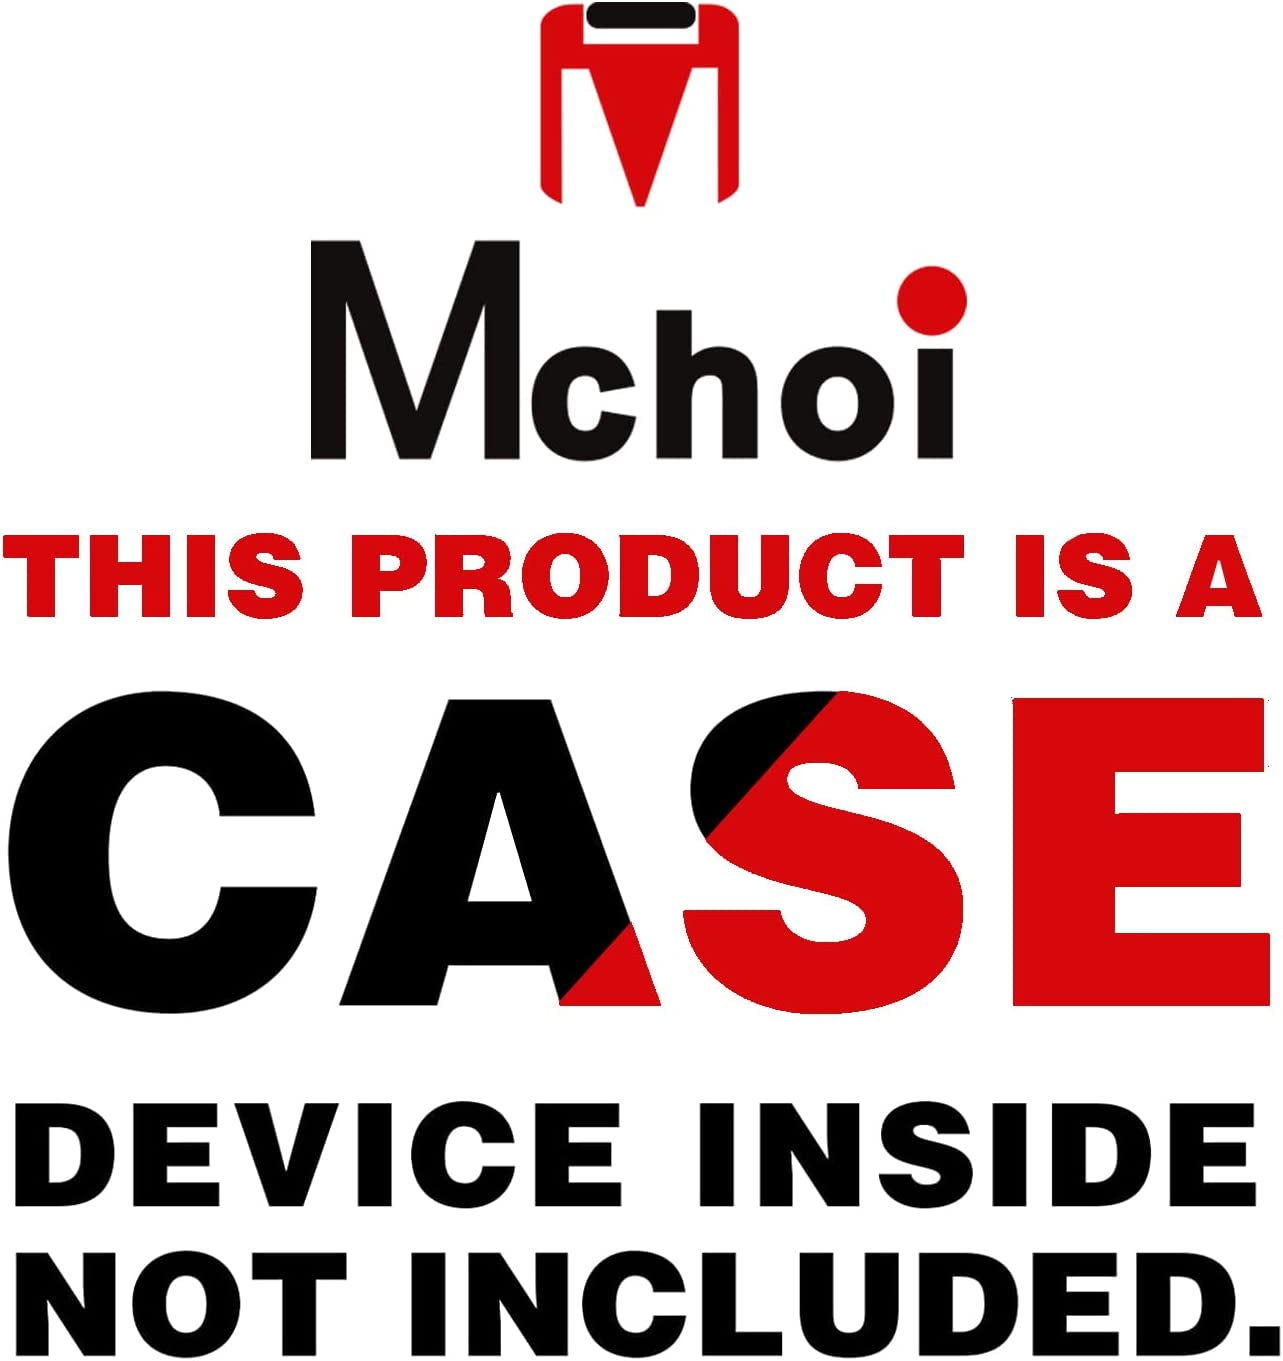 Mchoi Hard Carrying Case Fits for XGIMI Mogo Pro Portable Projector, Shockproof Waterproof Black Travel Protective Case, Case Only